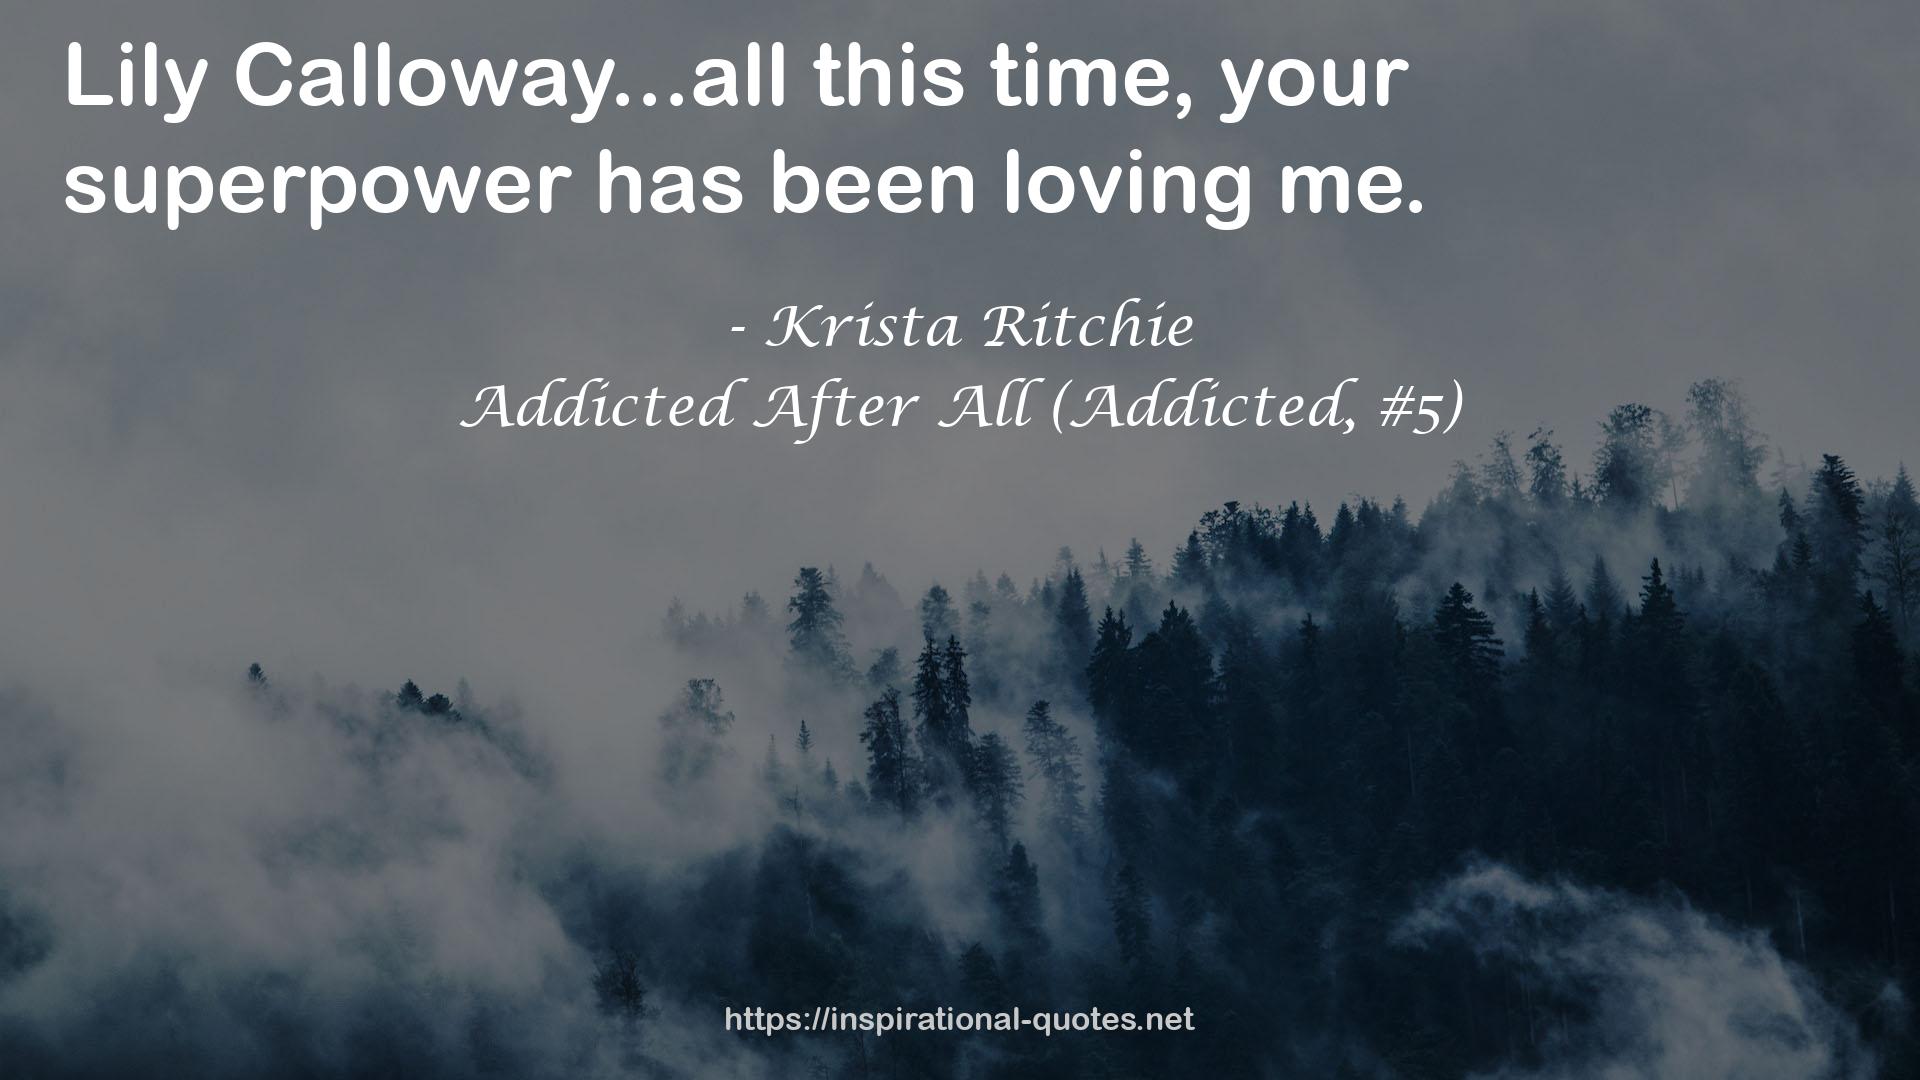 Addicted After All (Addicted, #5) QUOTES